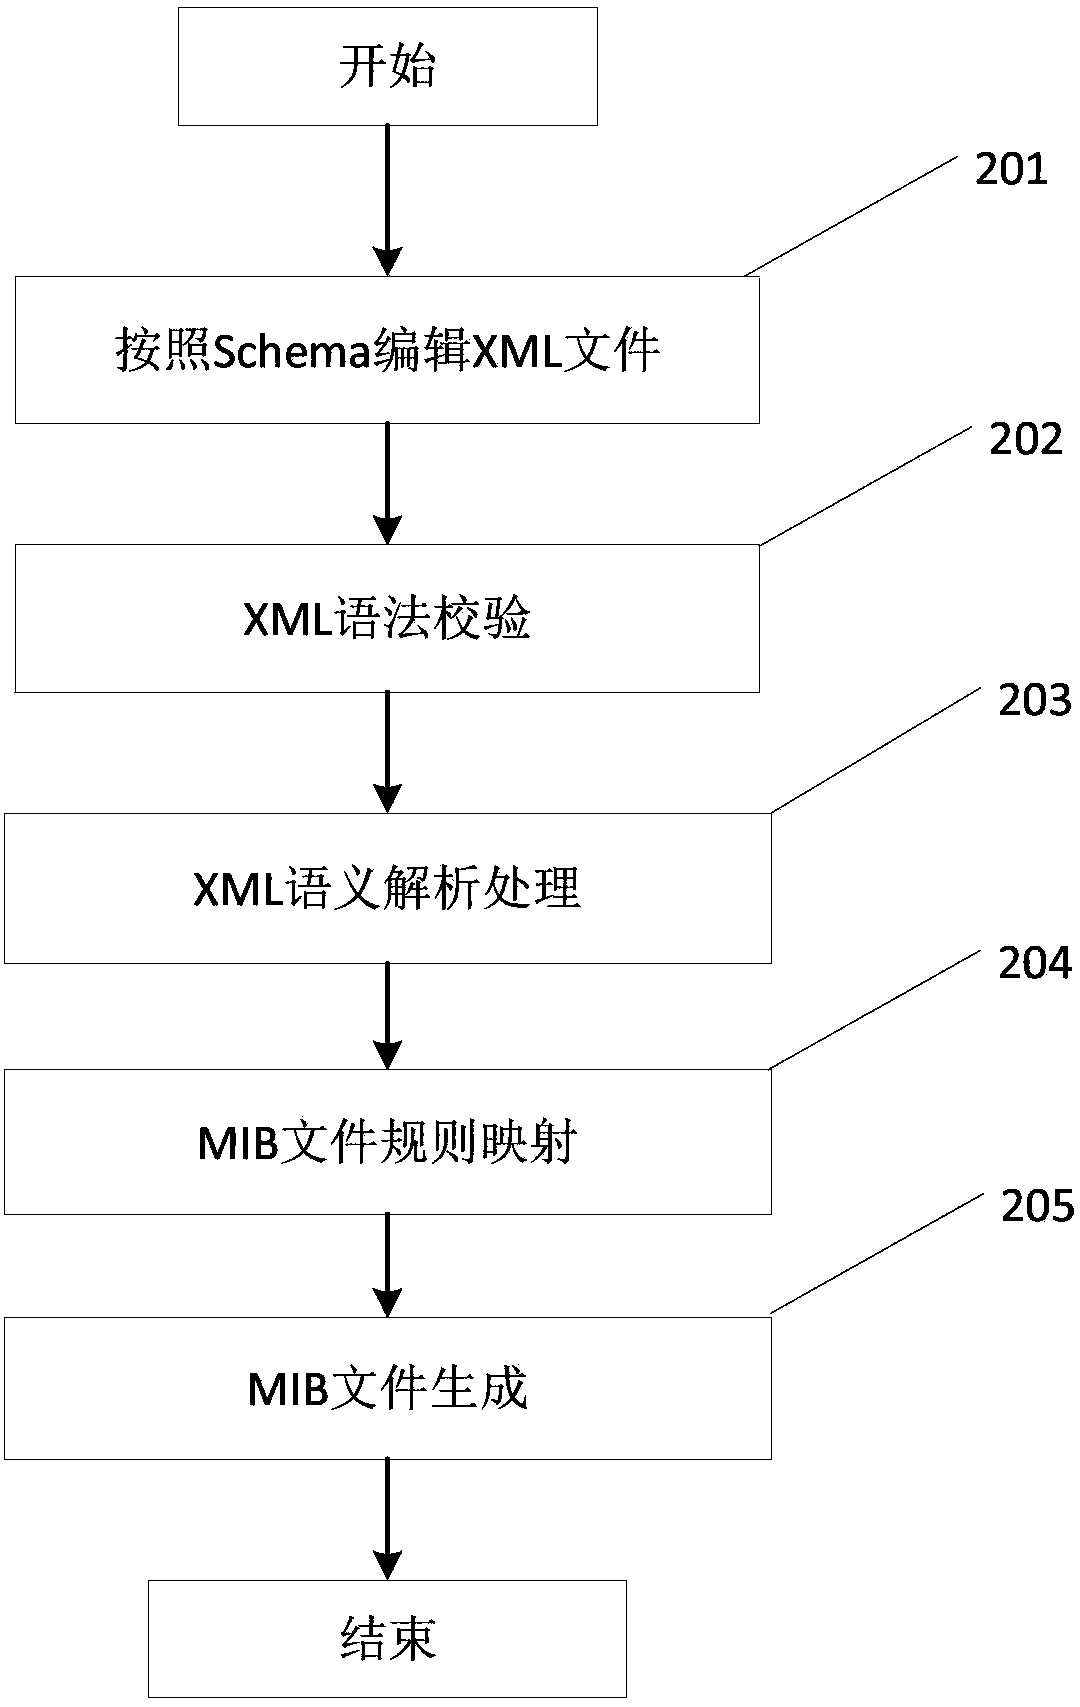 System and method for generating MIB files through XML files